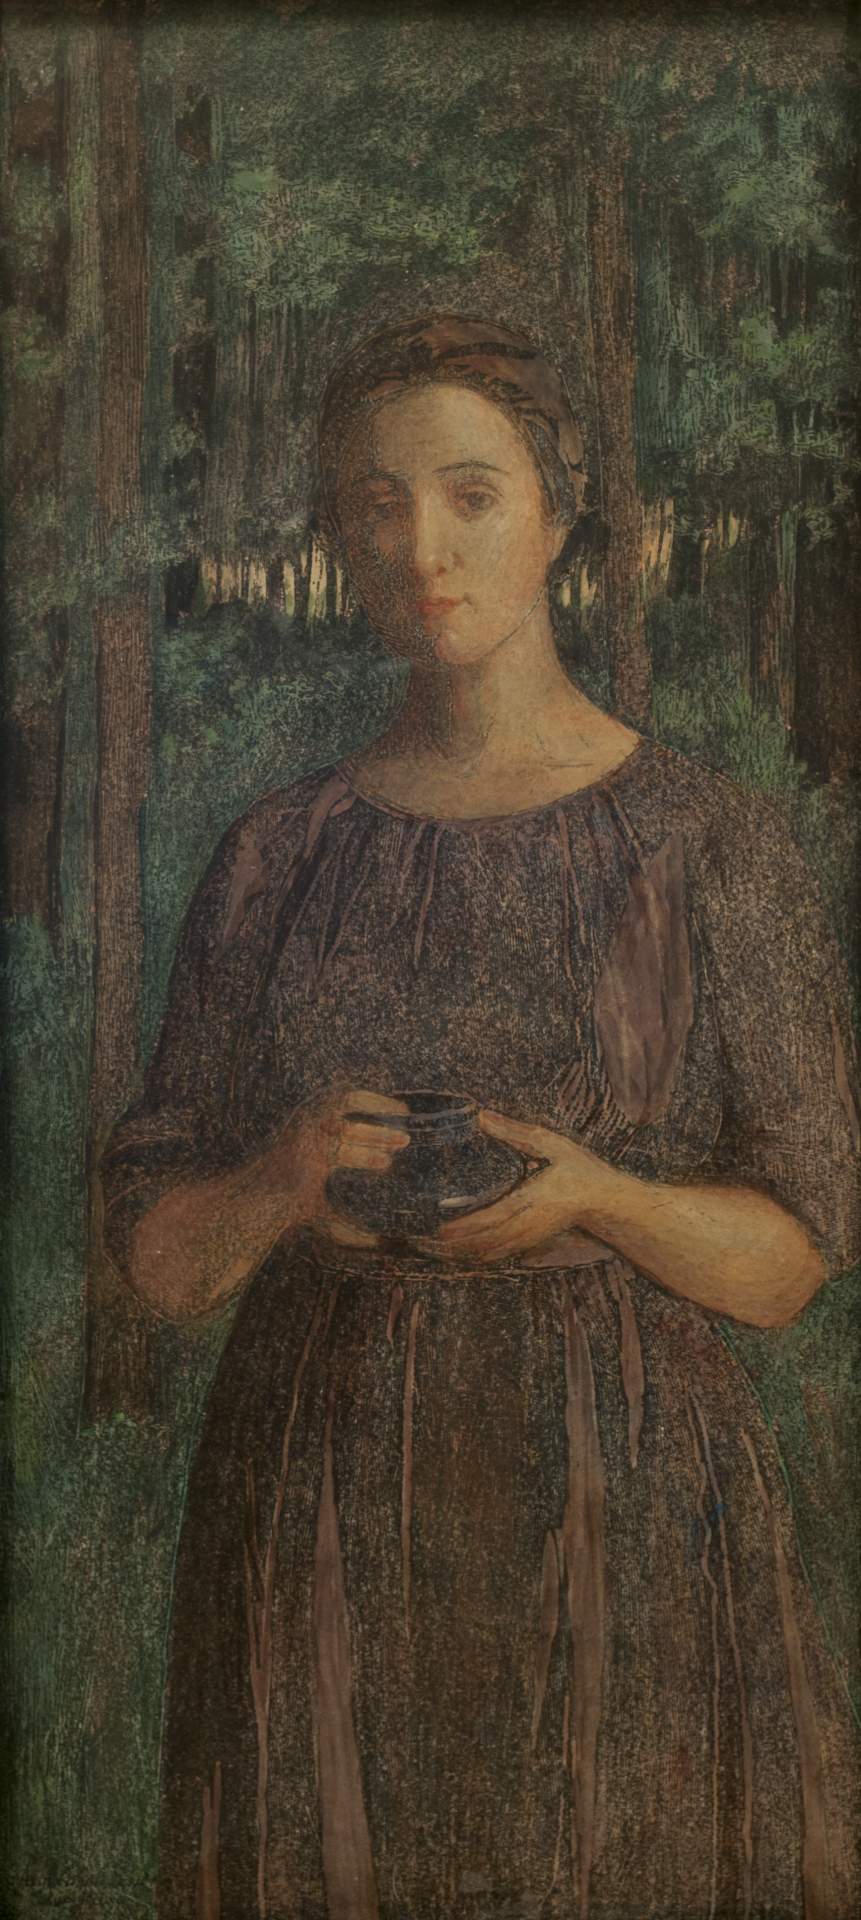 Untitled [Portrait of a woman in the woods holding a vessel]